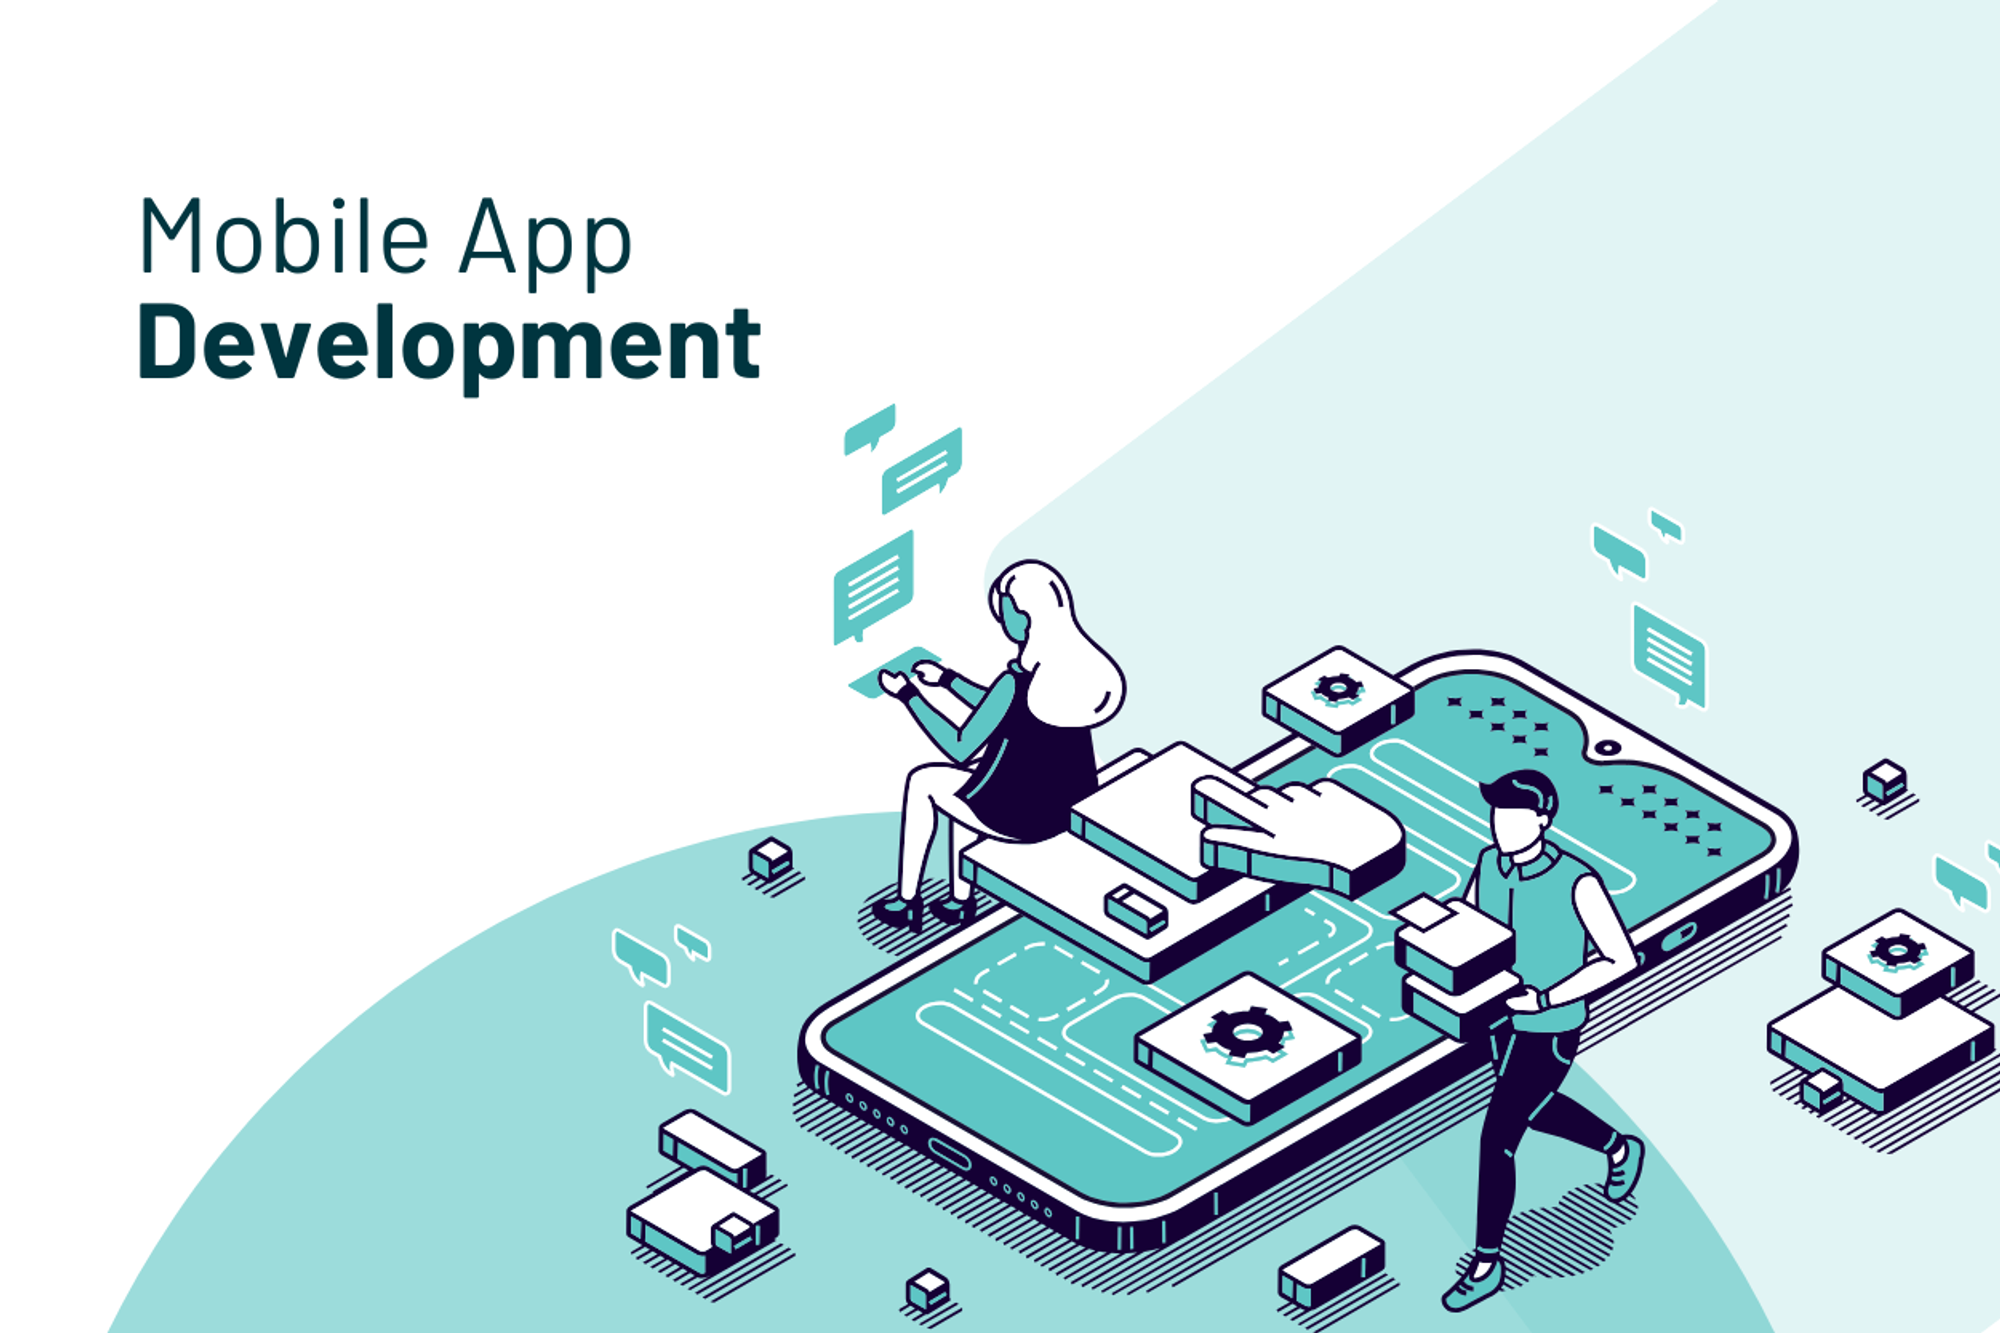 Introduction to Mobile App Development